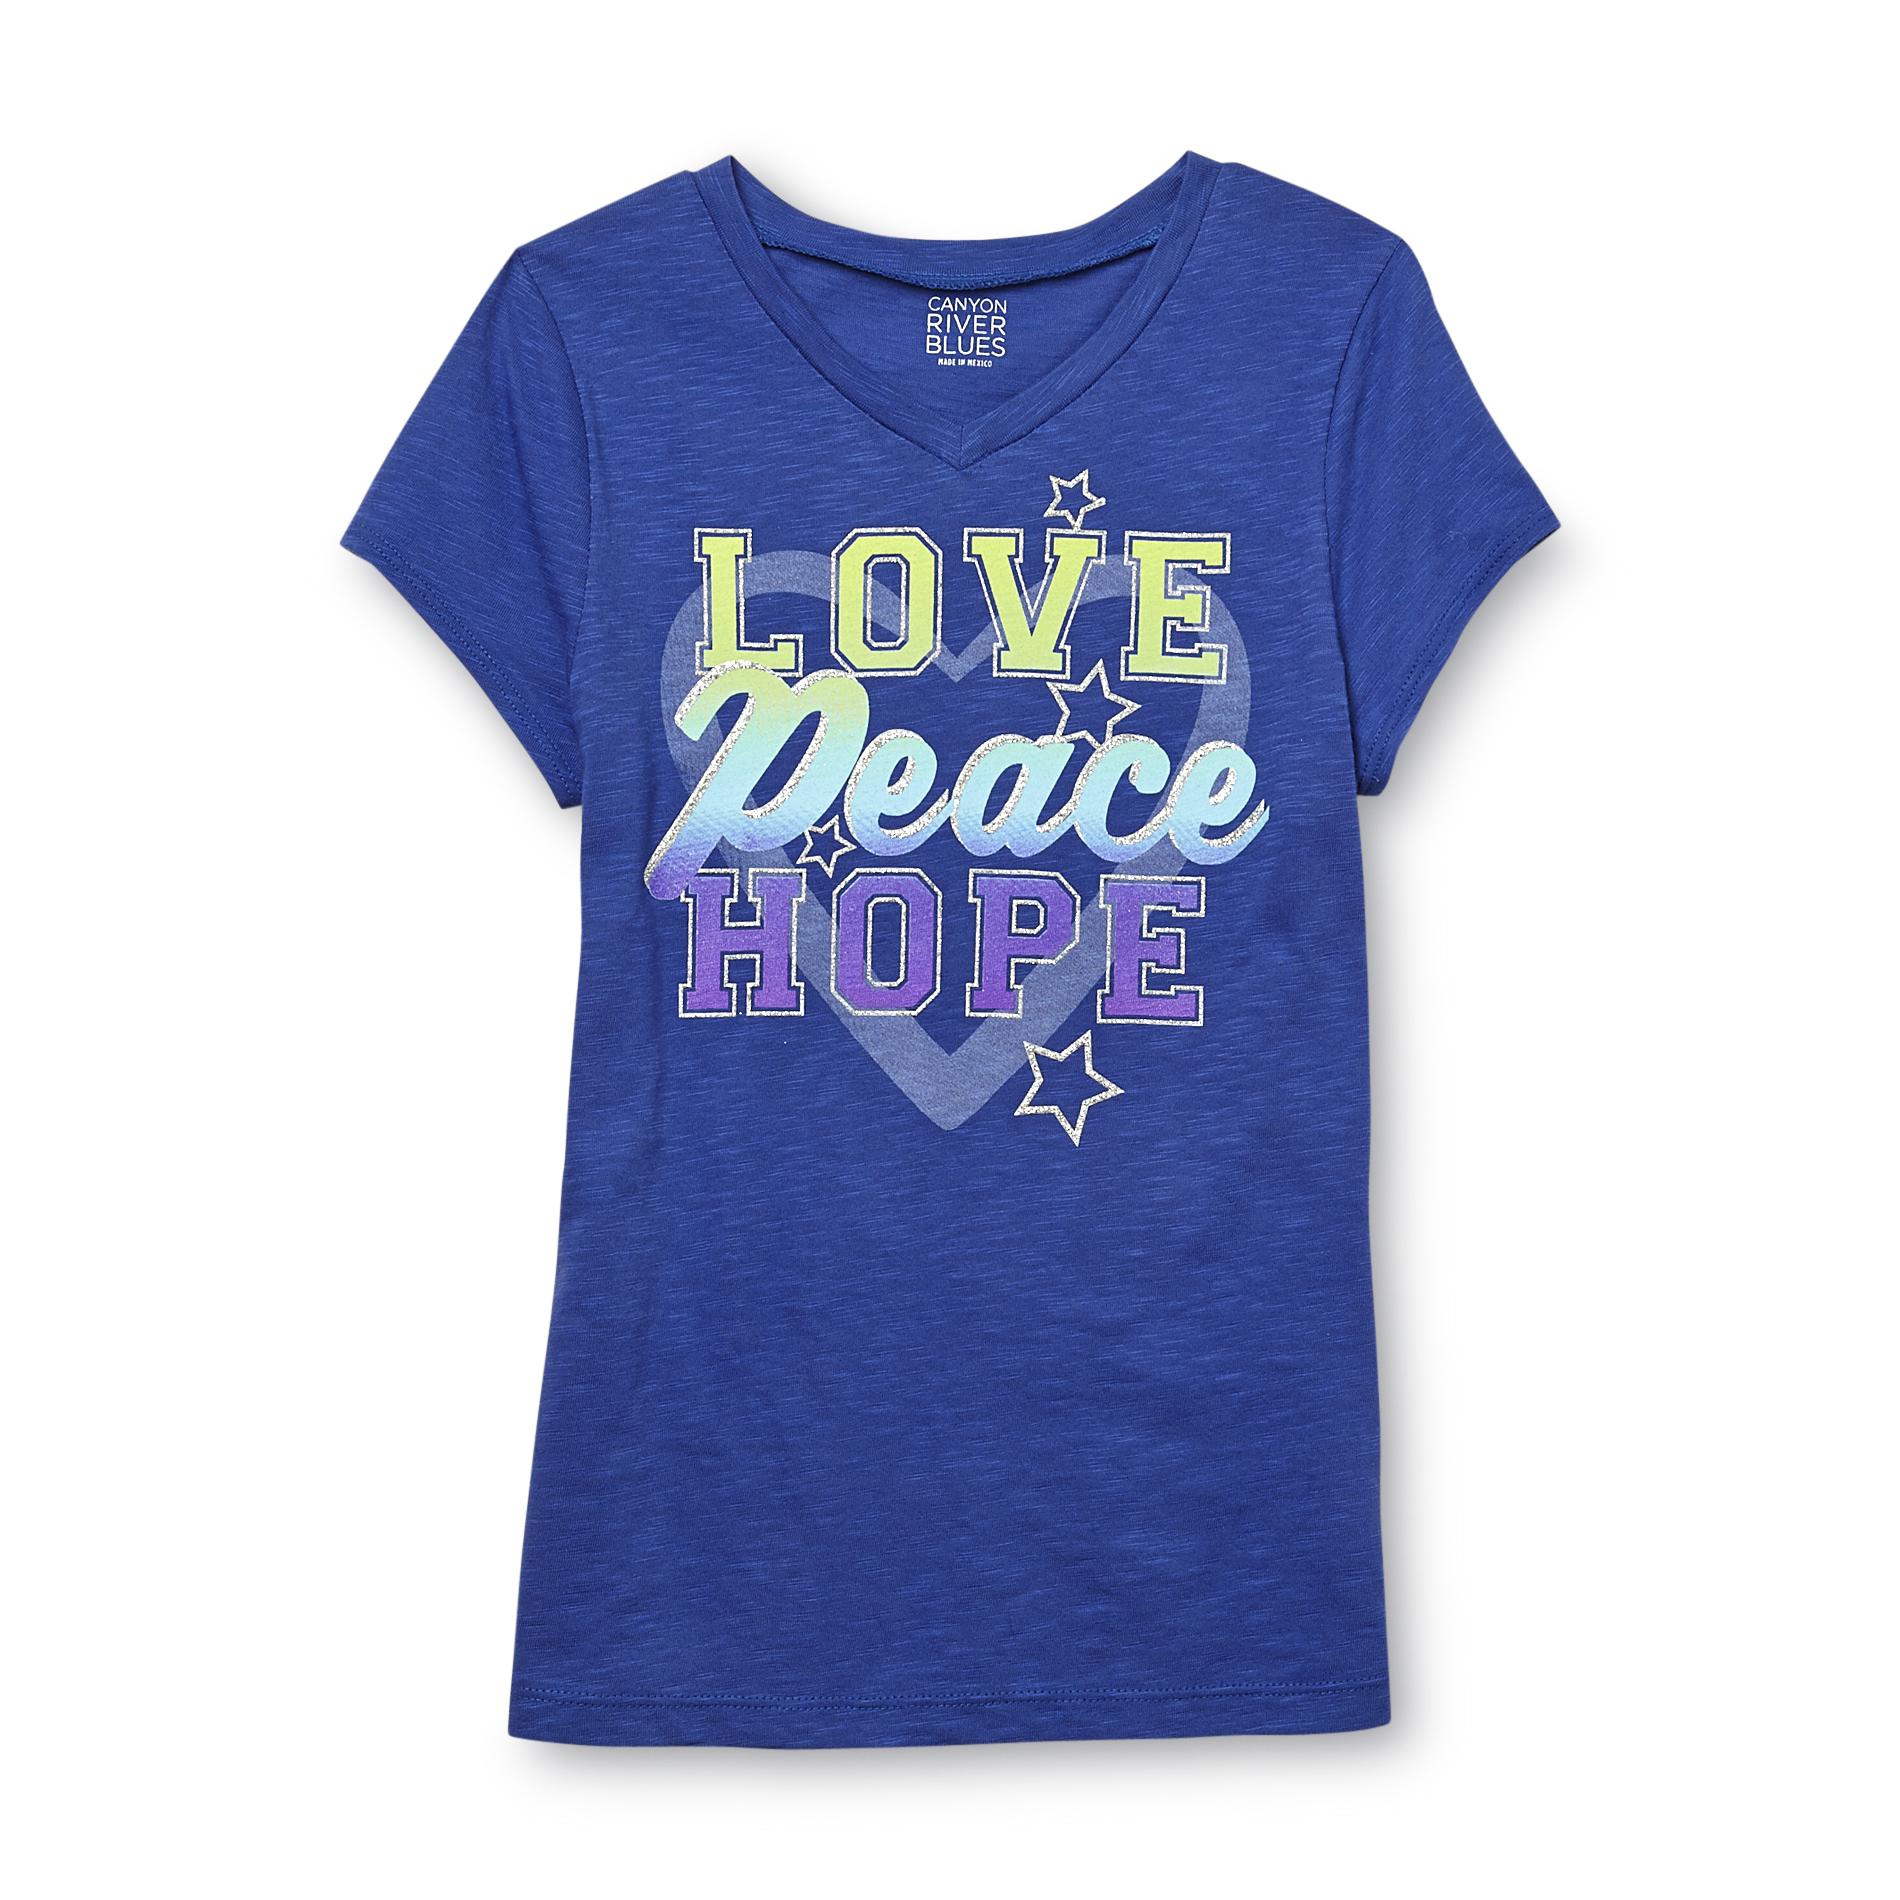 Canyon River Blues Girl's Graphic T-Shirt - Love  Peace  Hope